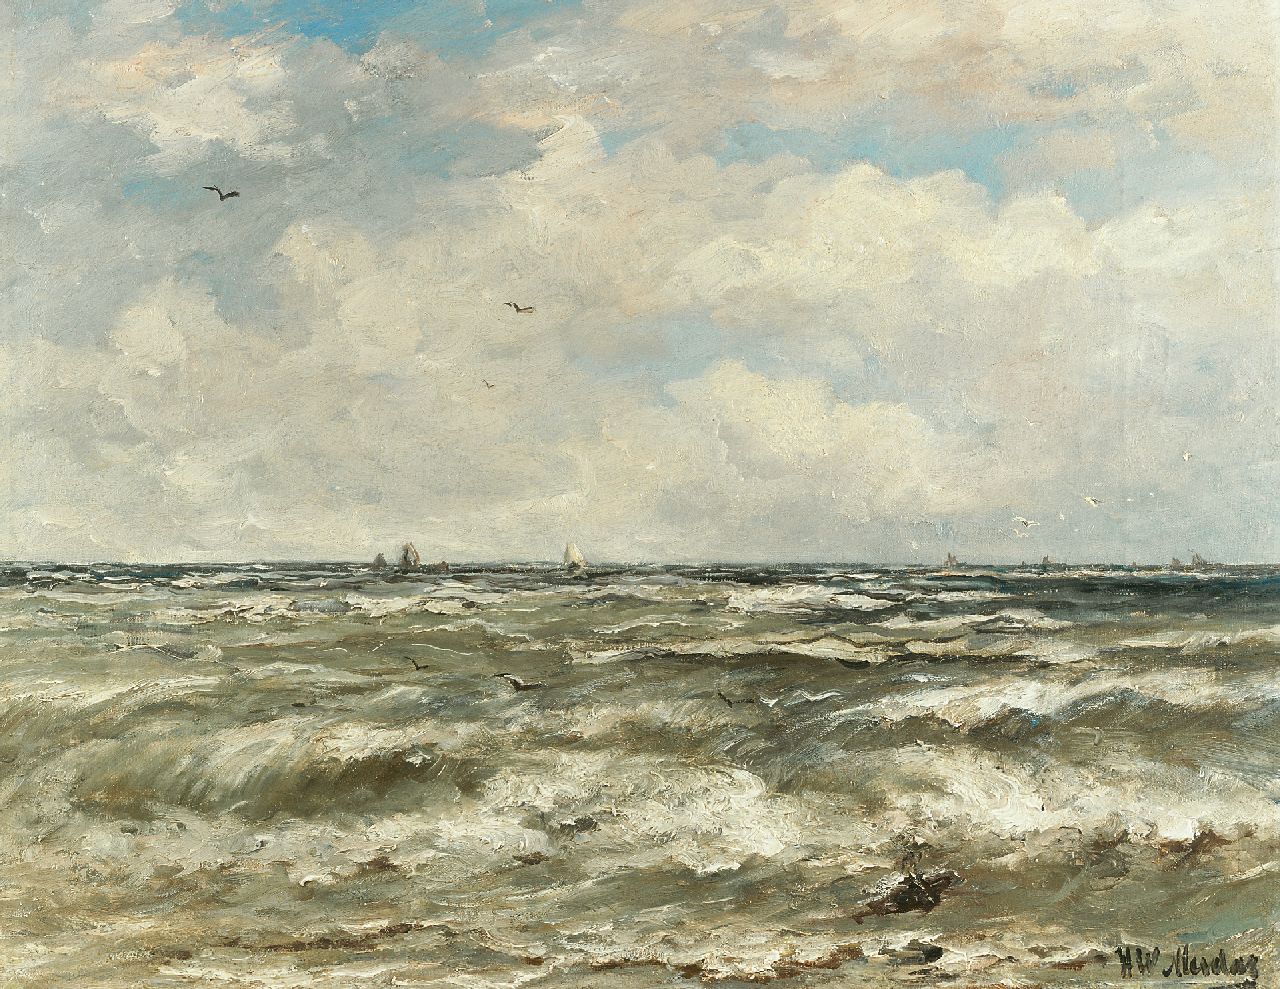 Mesdag H.W.  | Hendrik Willem Mesdag, At open sea, oil on canvas 40.2 x 51.3 cm, signed l.r.